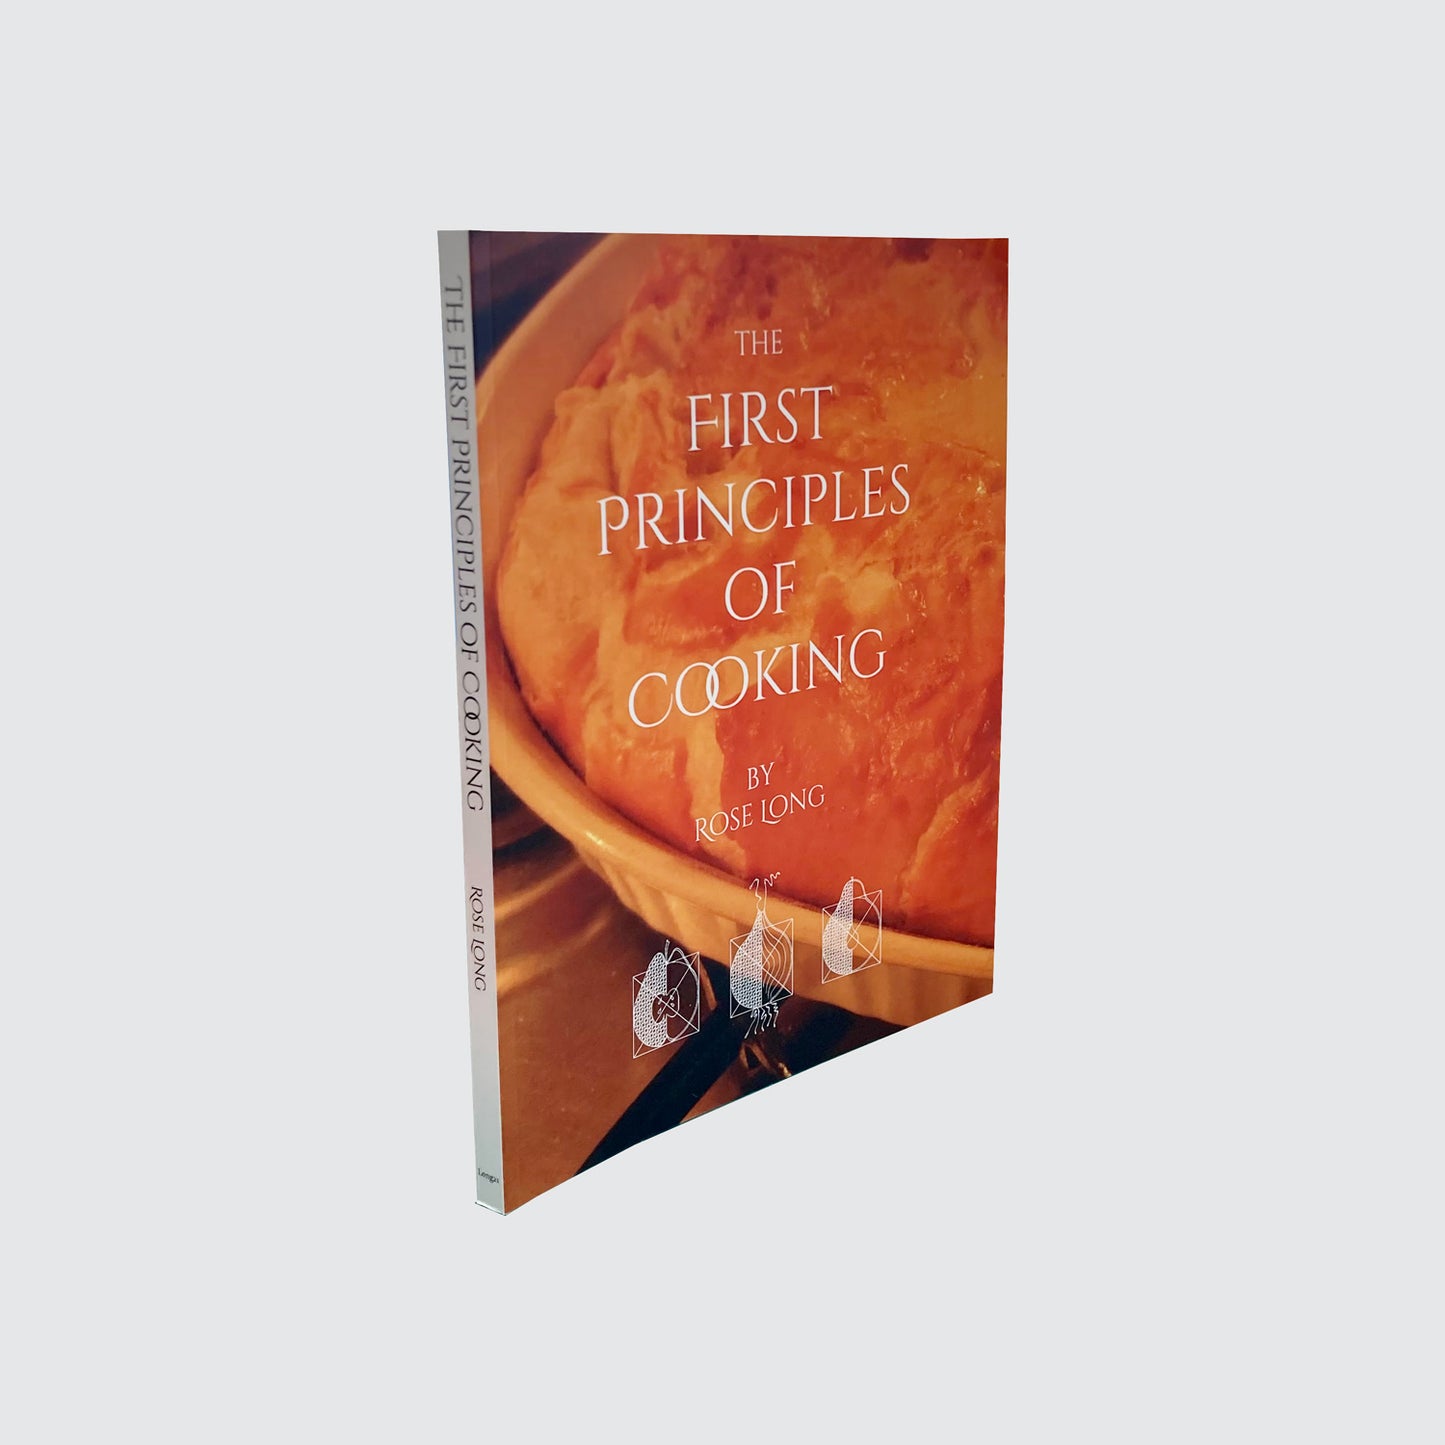 Recipe Book - The First Principles Of Cooking by Rose Long - Print Version